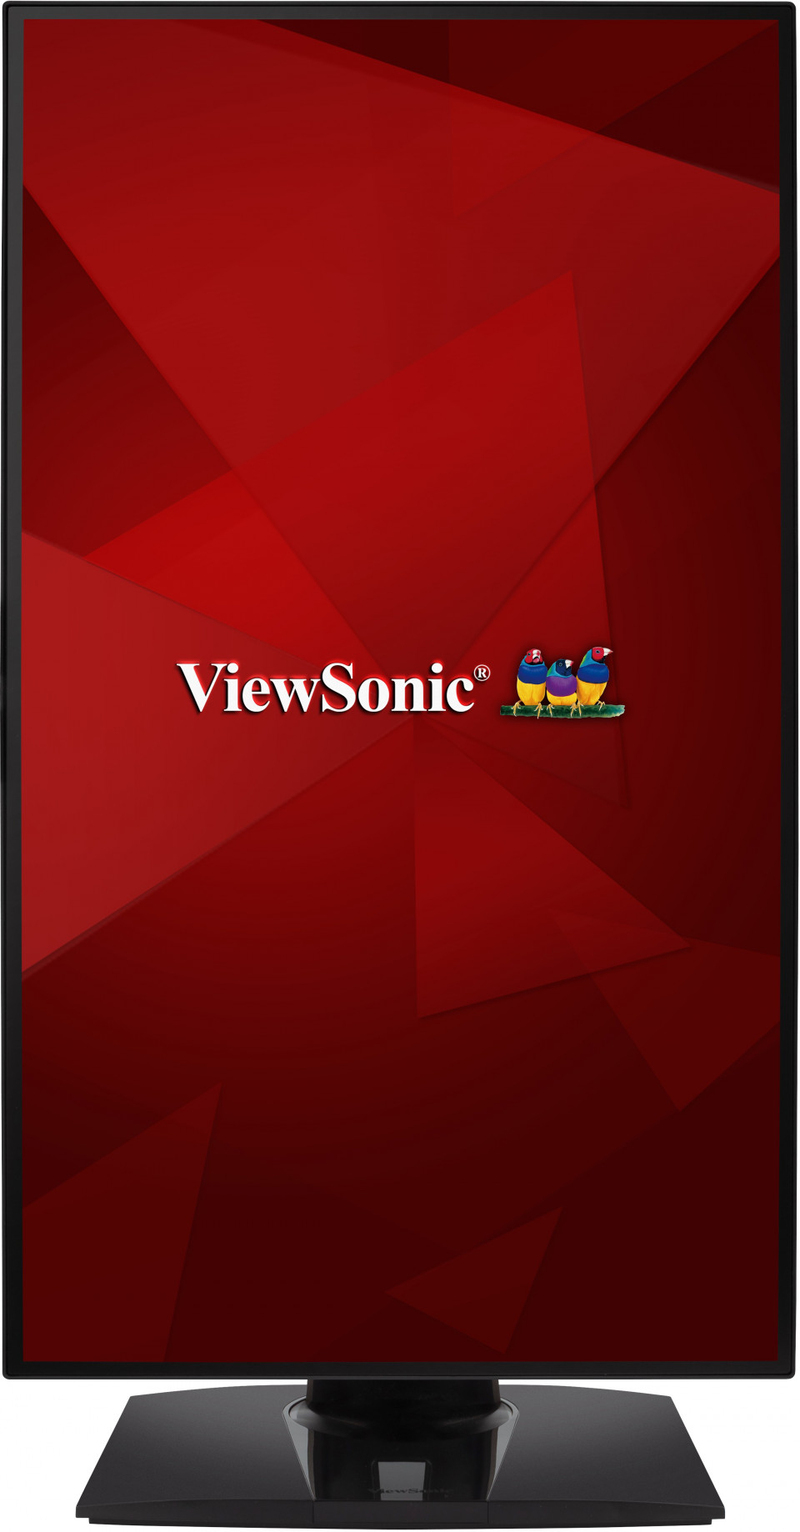 Viewsonic VP2768A 2K Pantone Validated 100% SRGB Monitor With Docking Station Design